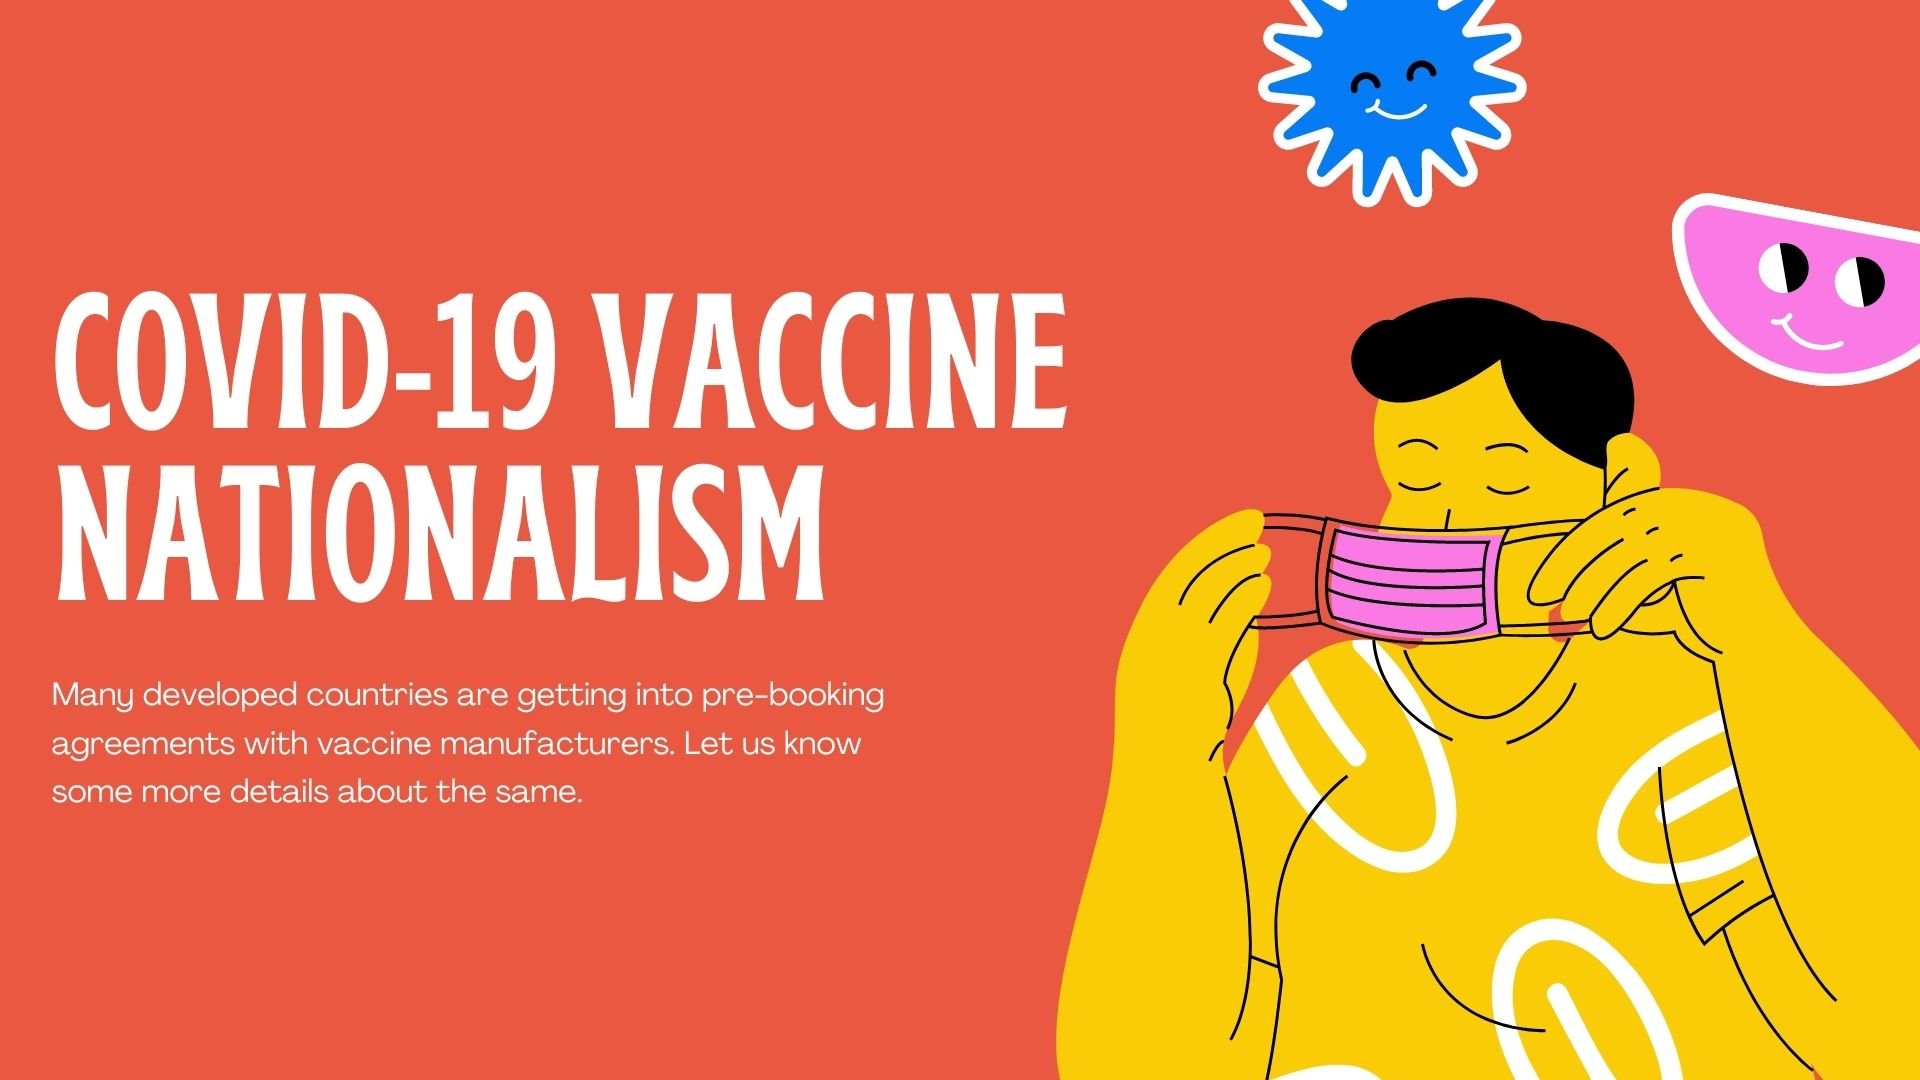 You are currently viewing COVID-19 VACCINE NATIONALISM